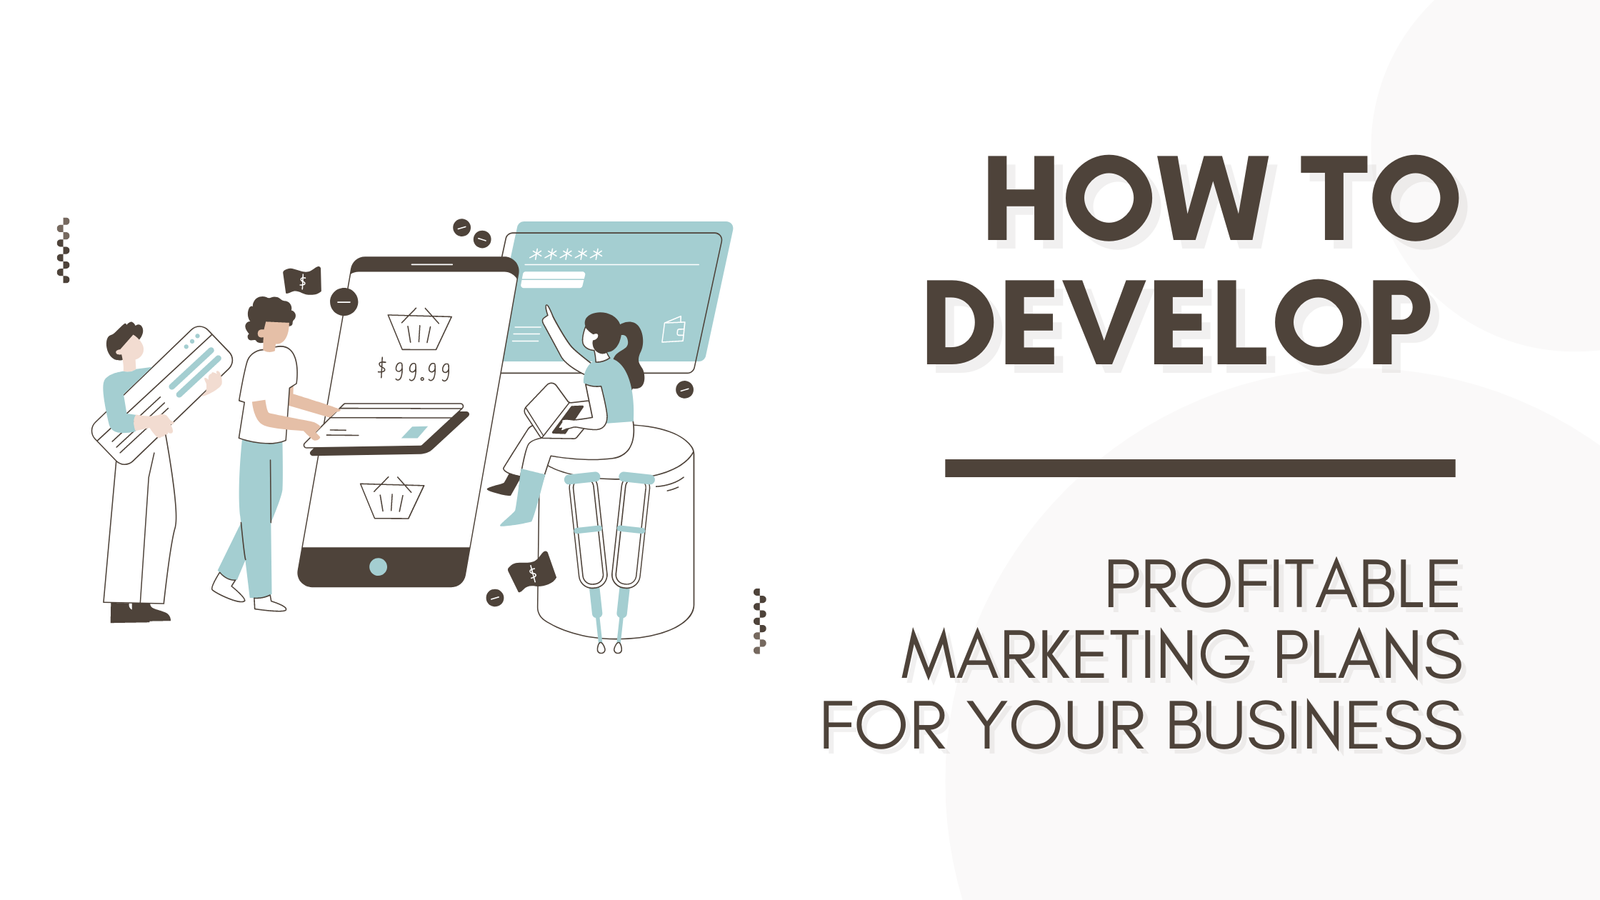 How to develop profitable marketing plans for your business